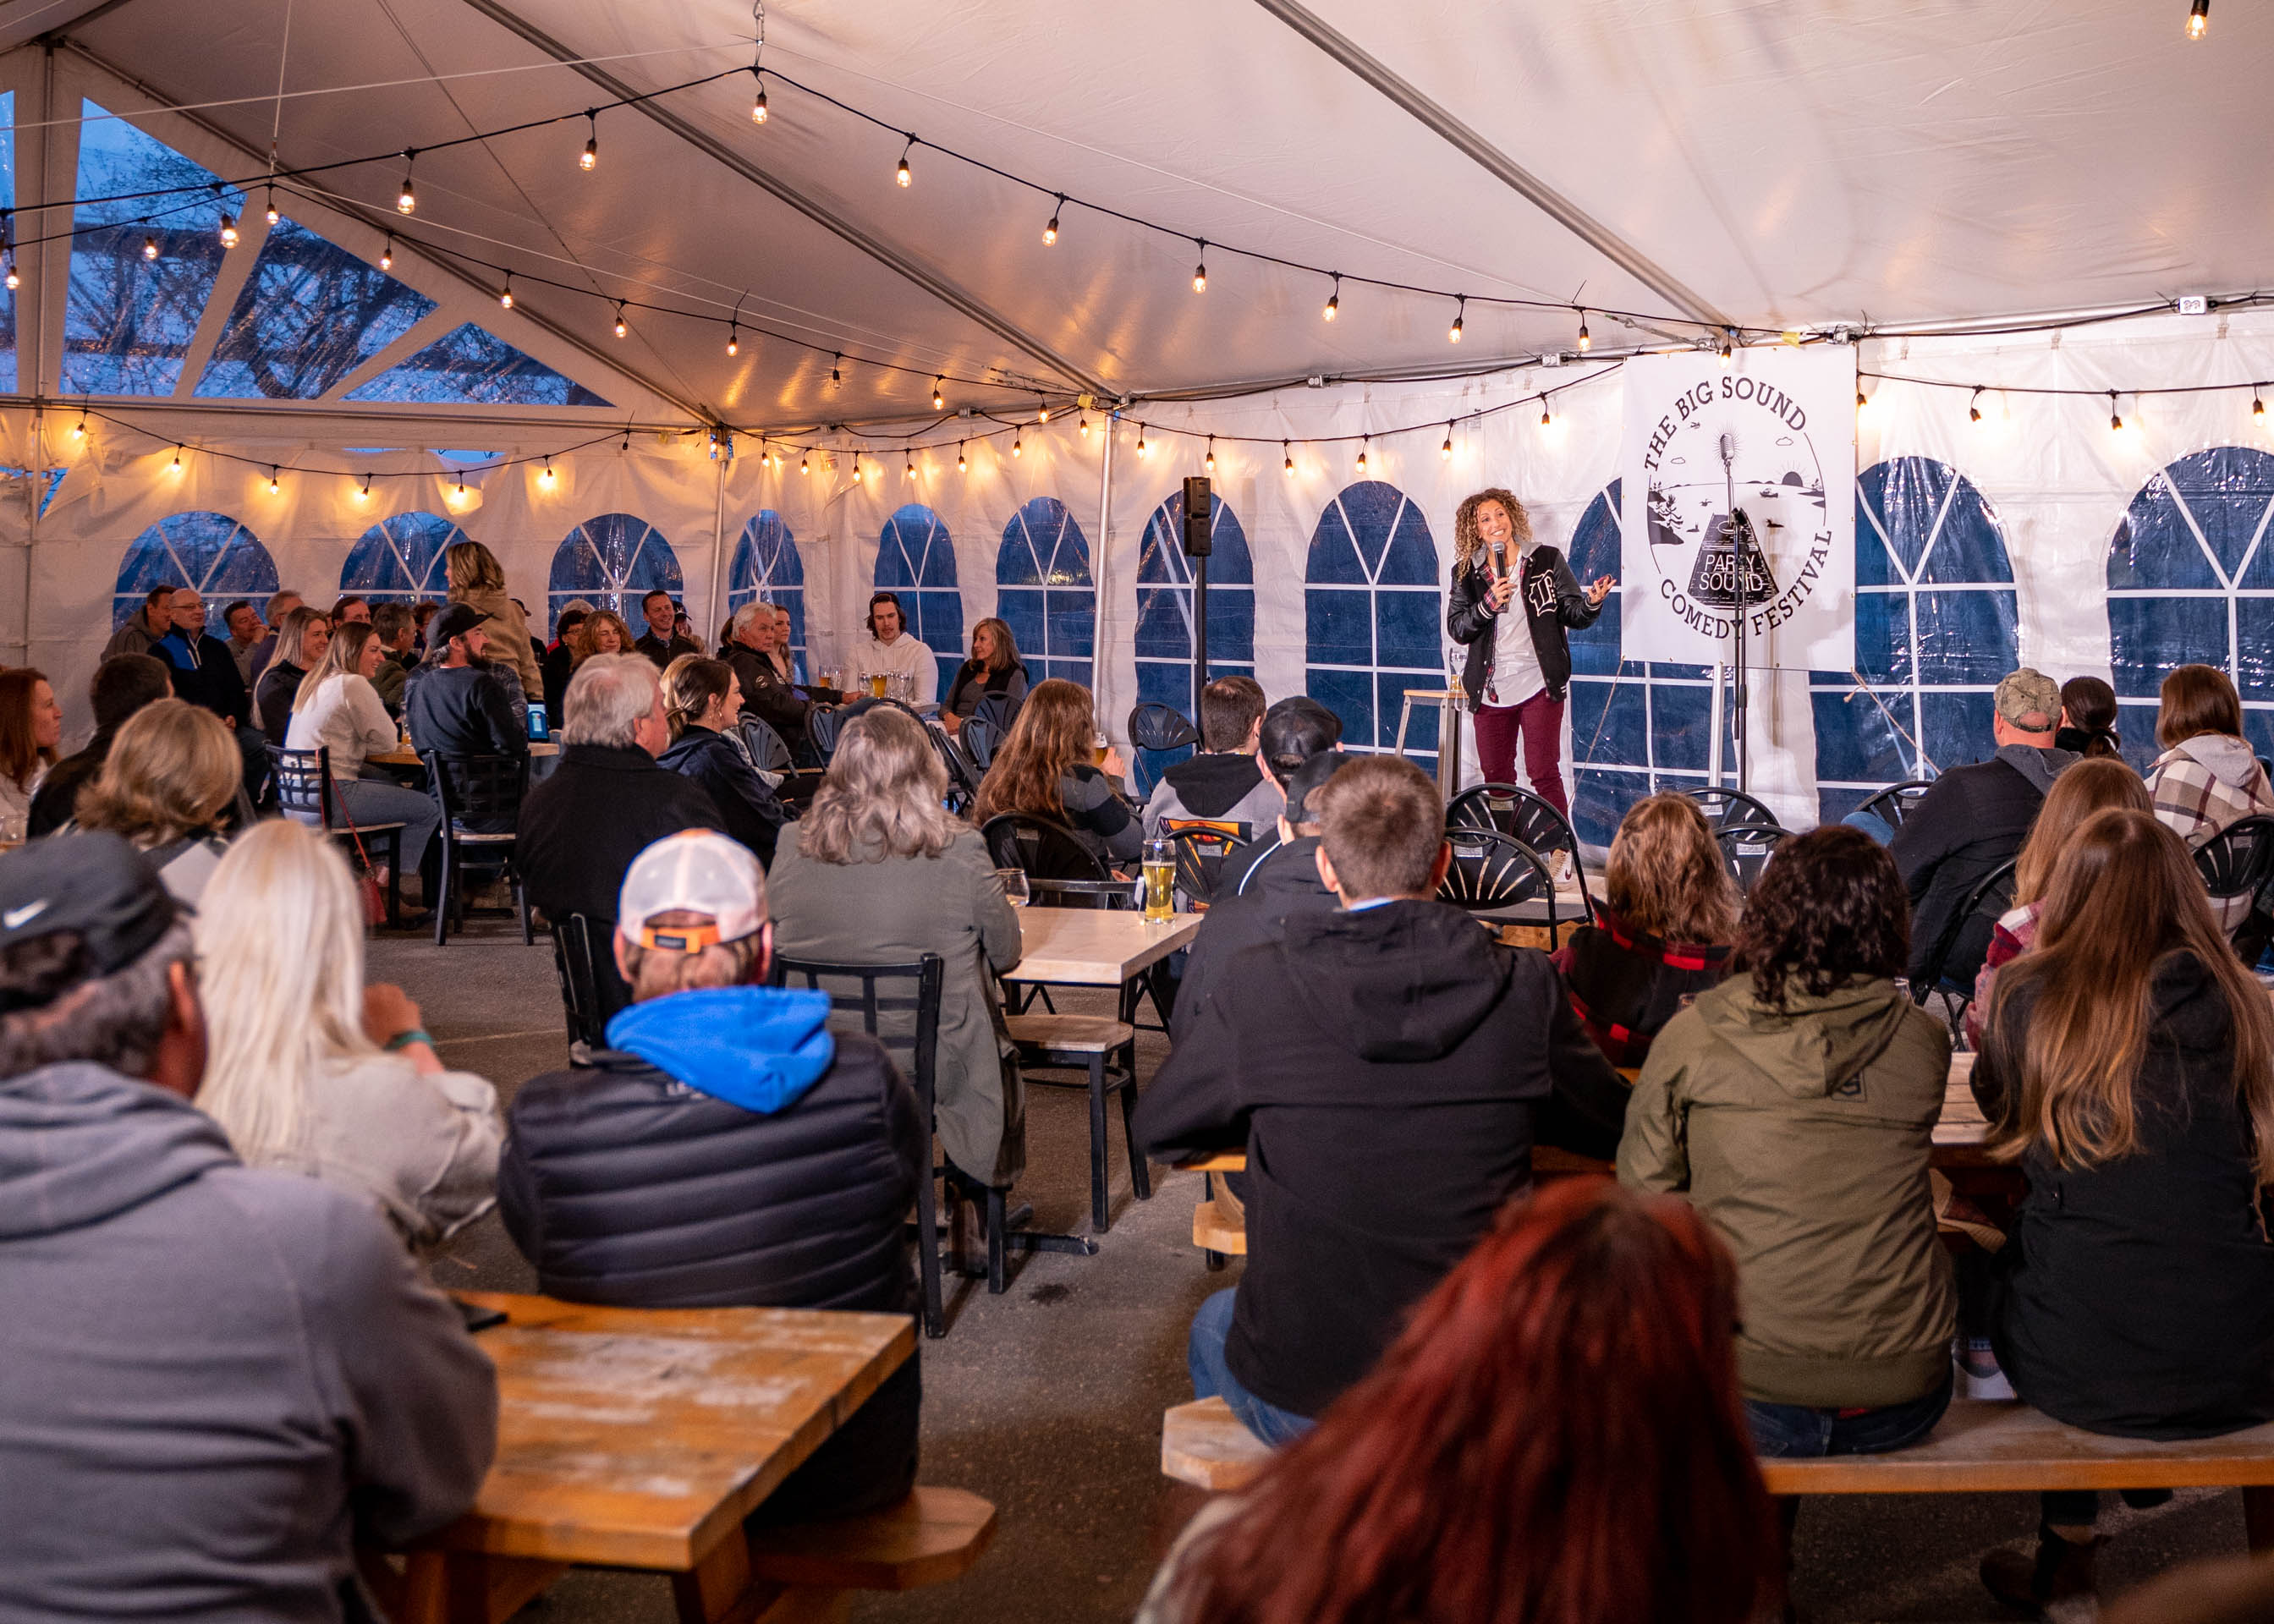 Comedy under the tent!